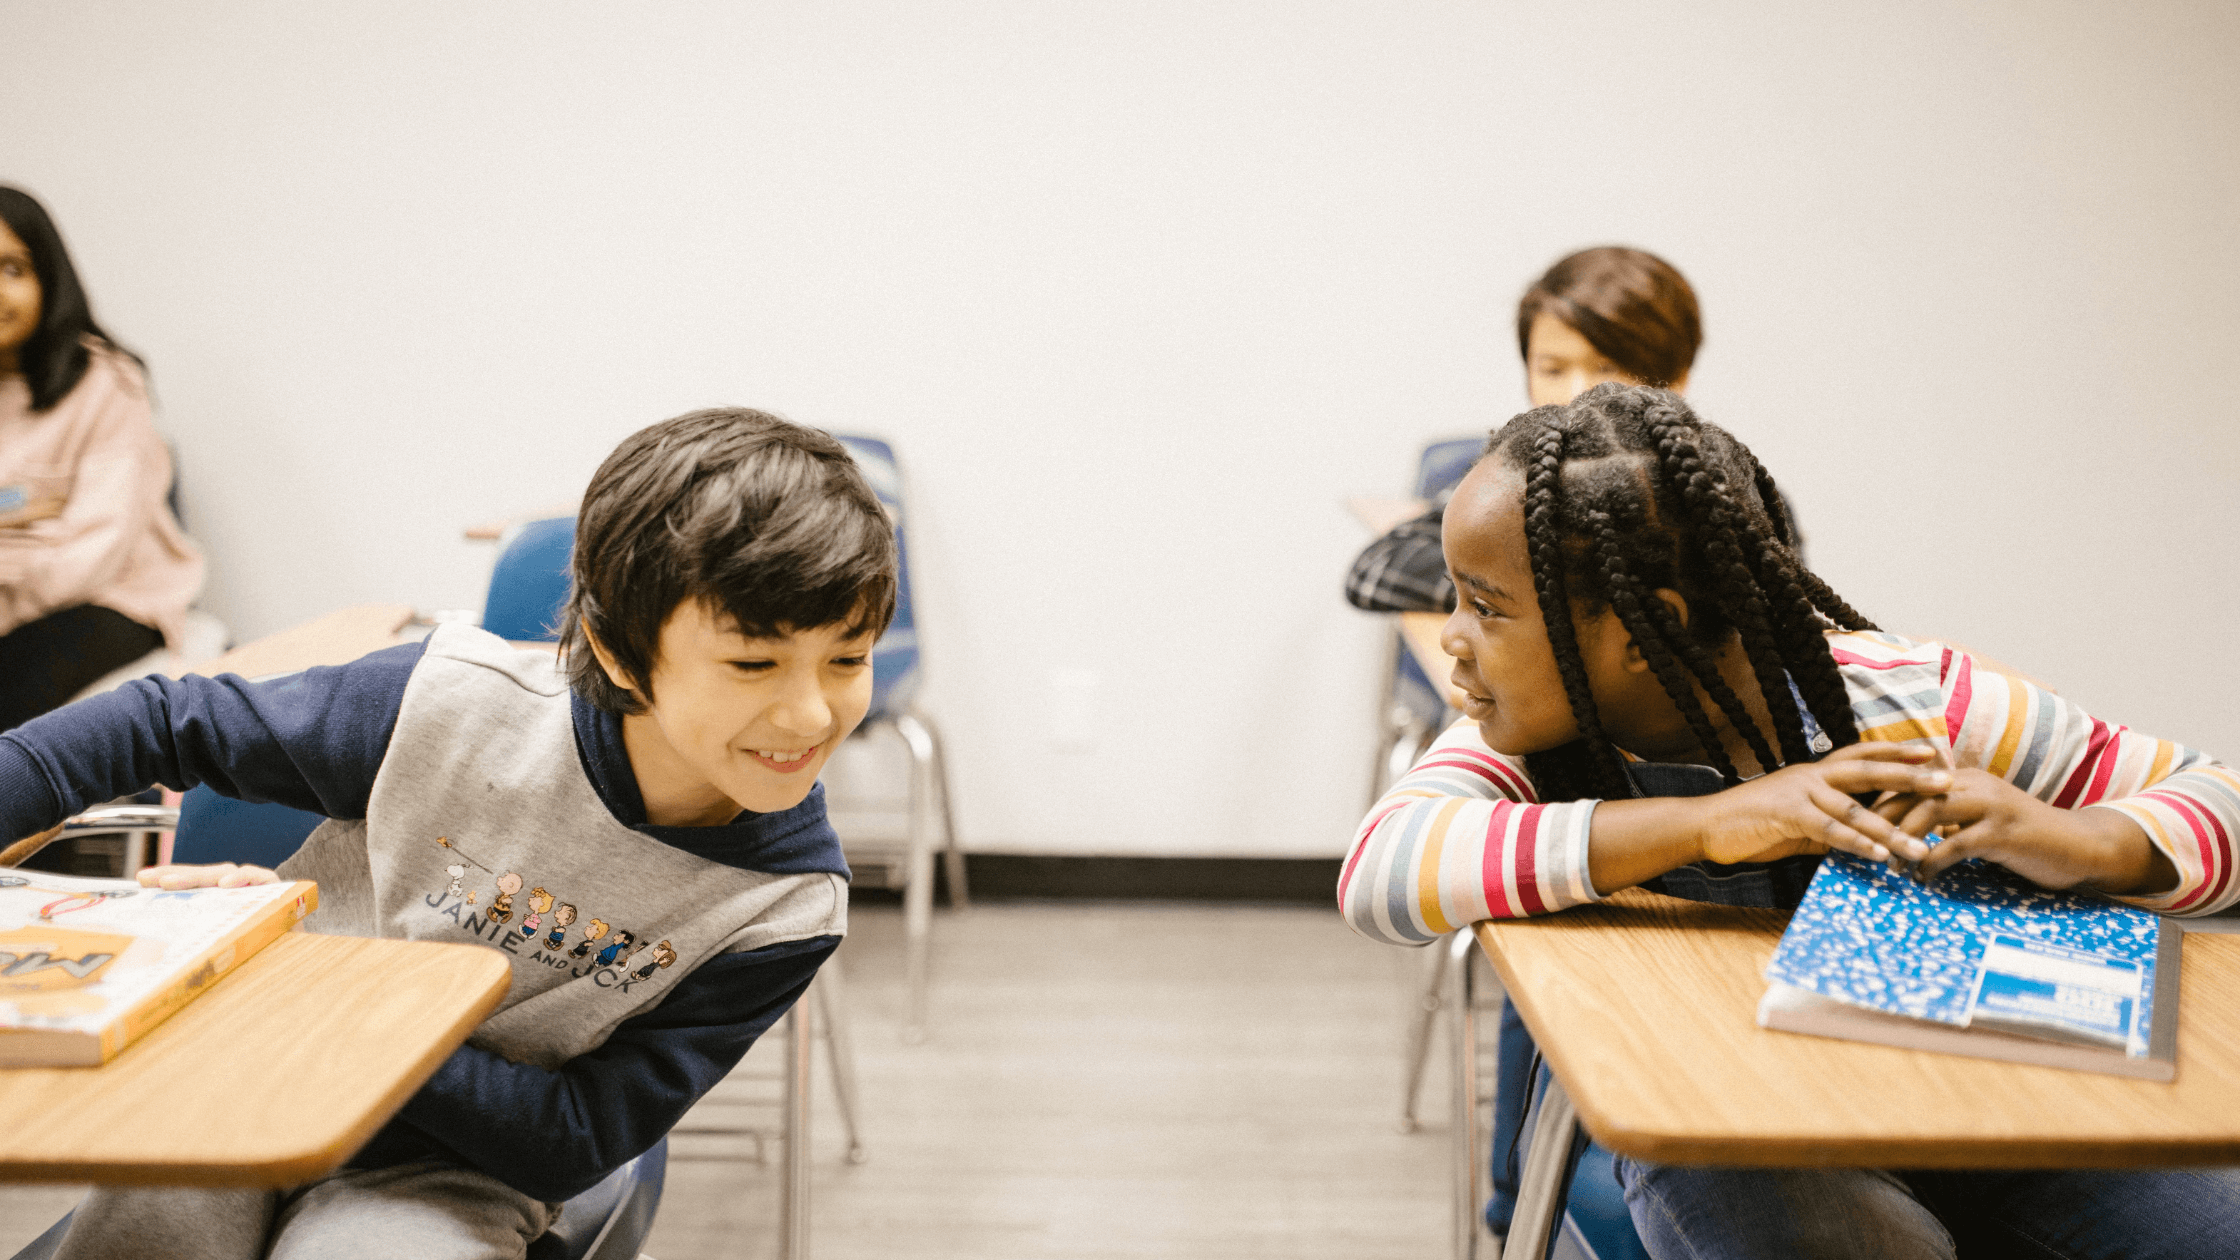 How to Teach Conversation Skills to Elementary Students